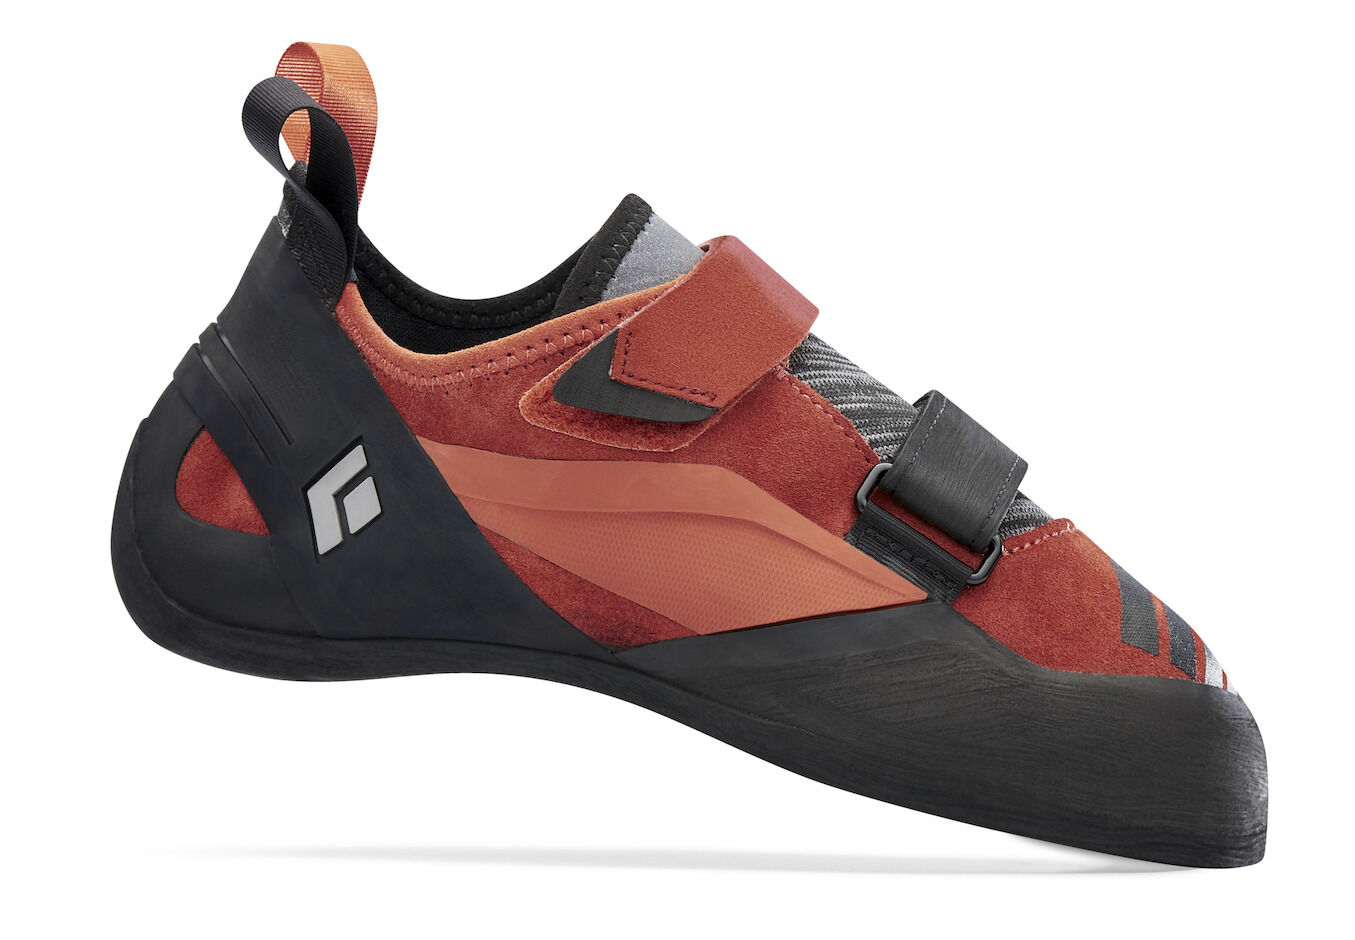 Black Diamond Focus Climbing Shoes - Chaussons escalade homme | Hardloop